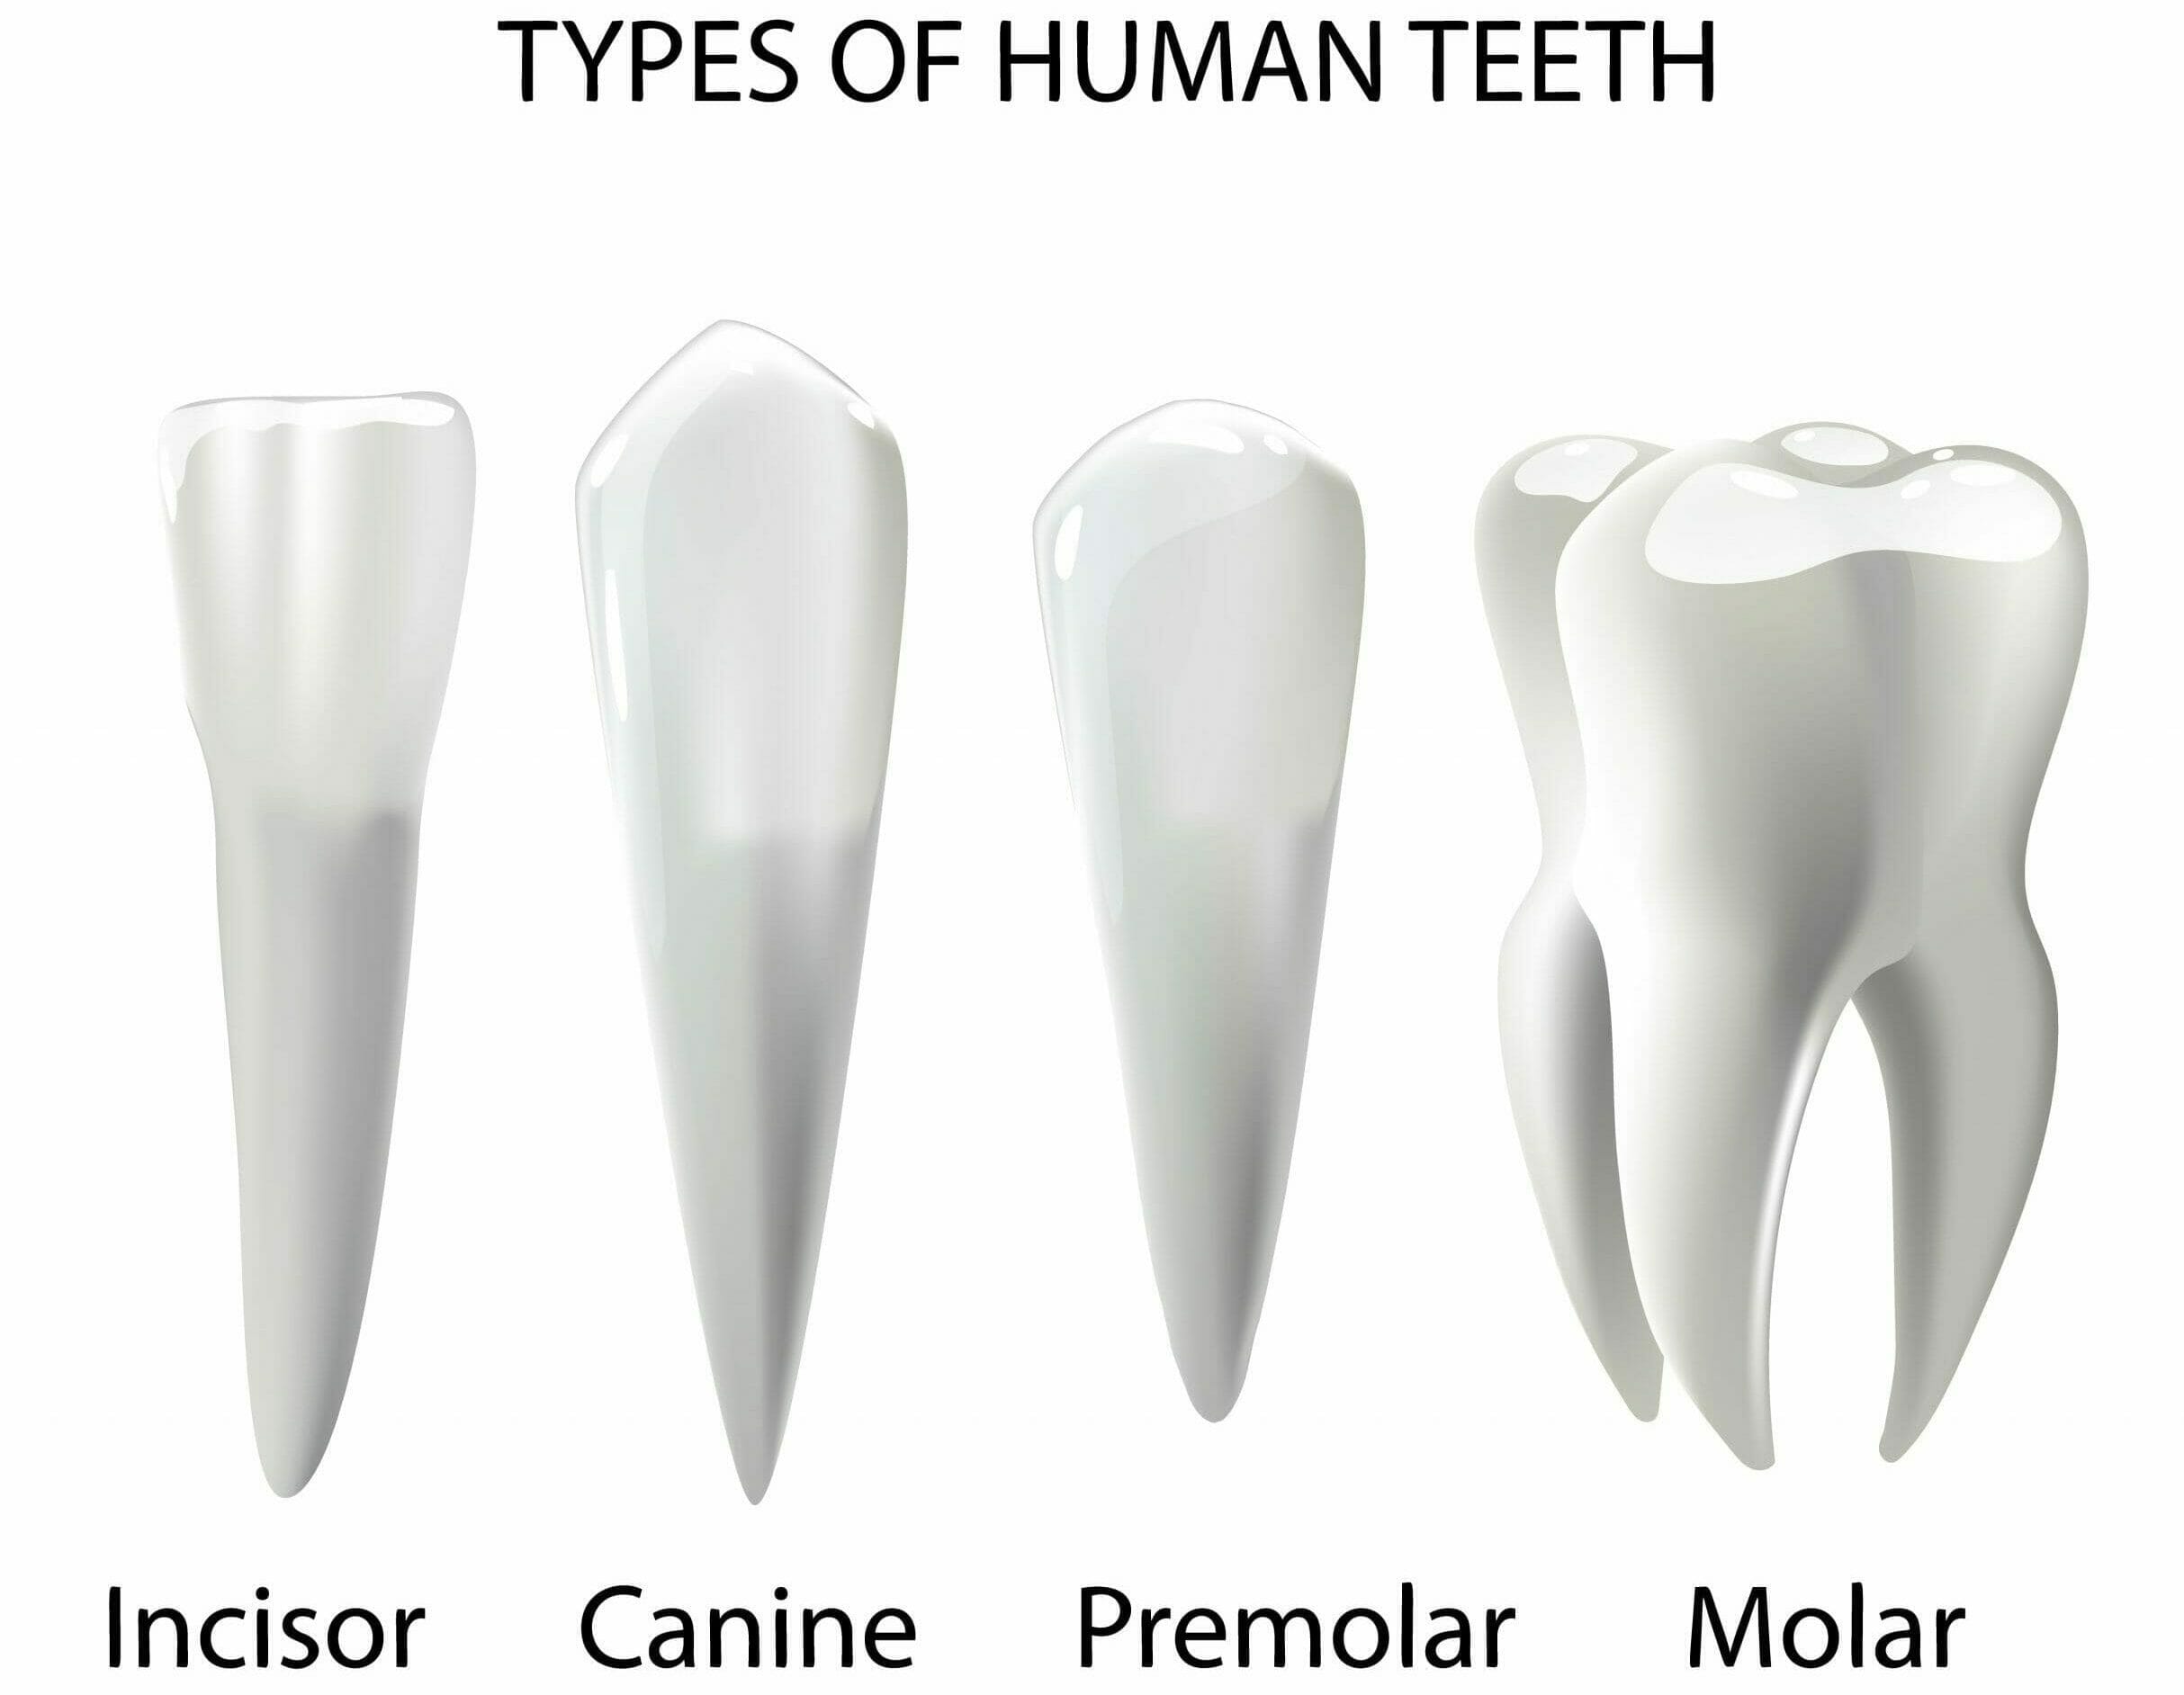 what are canine teeth called in humans